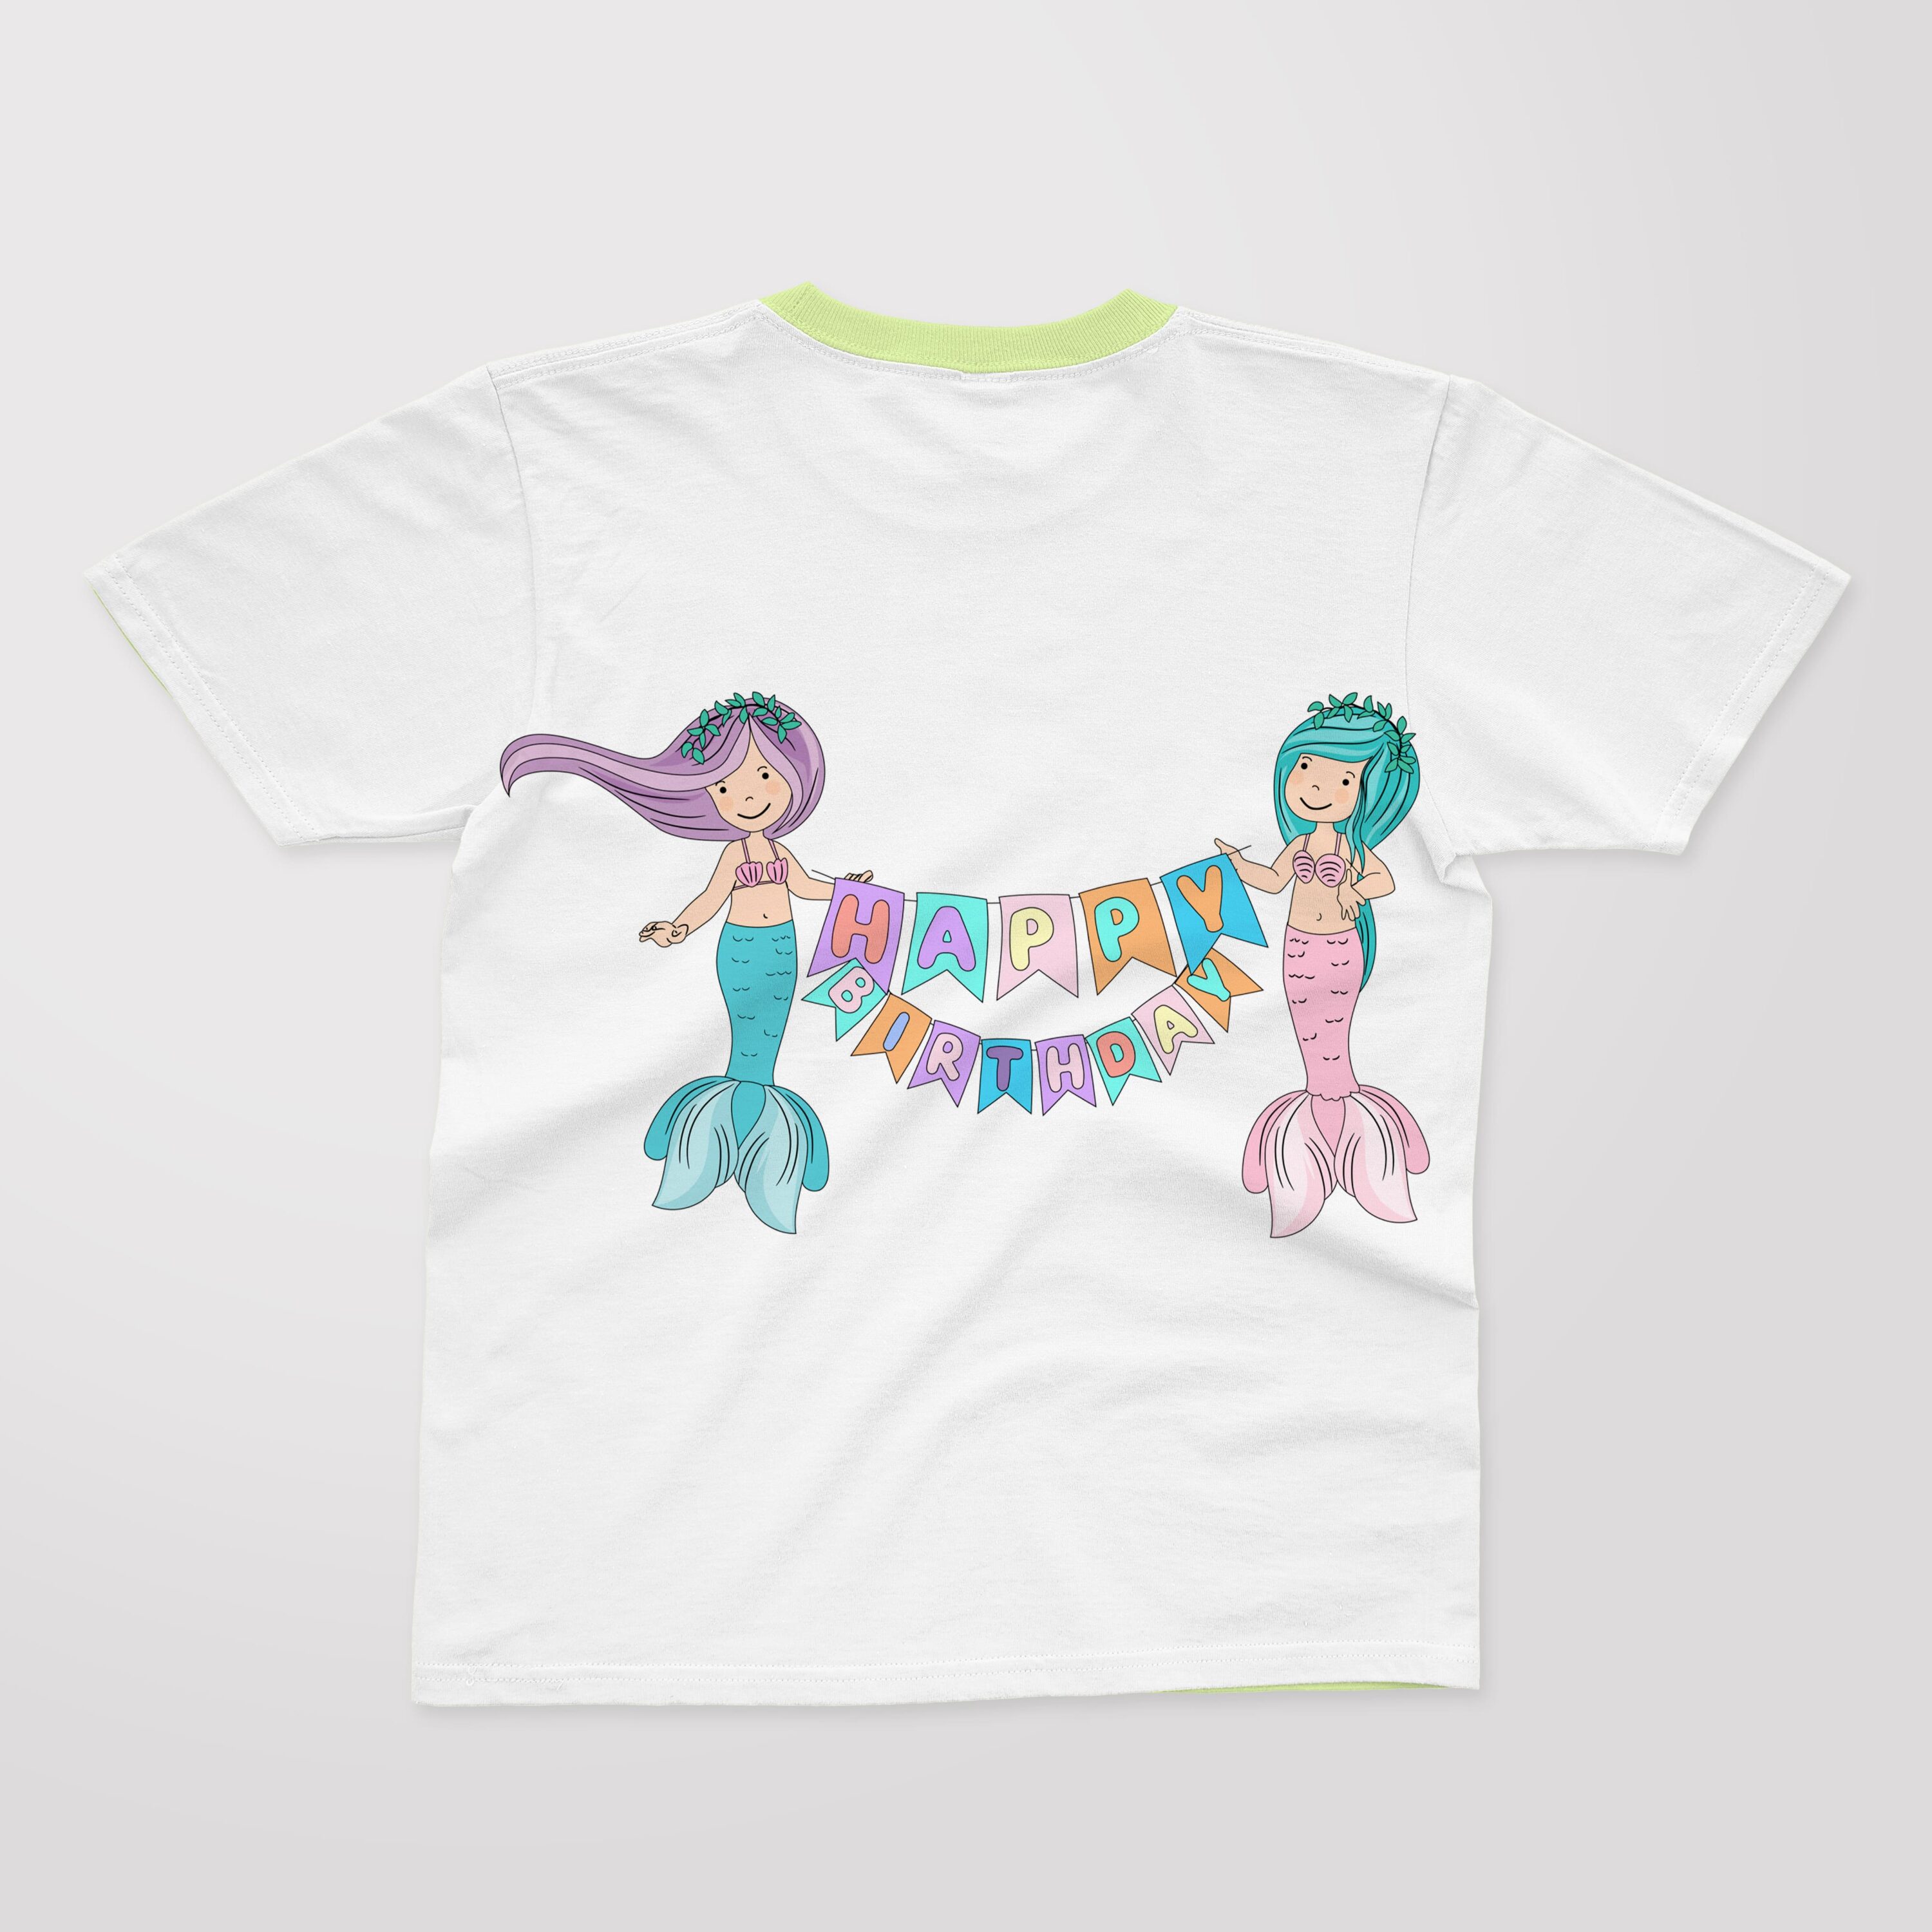 Two happy mermaids are celebrating their birthday.